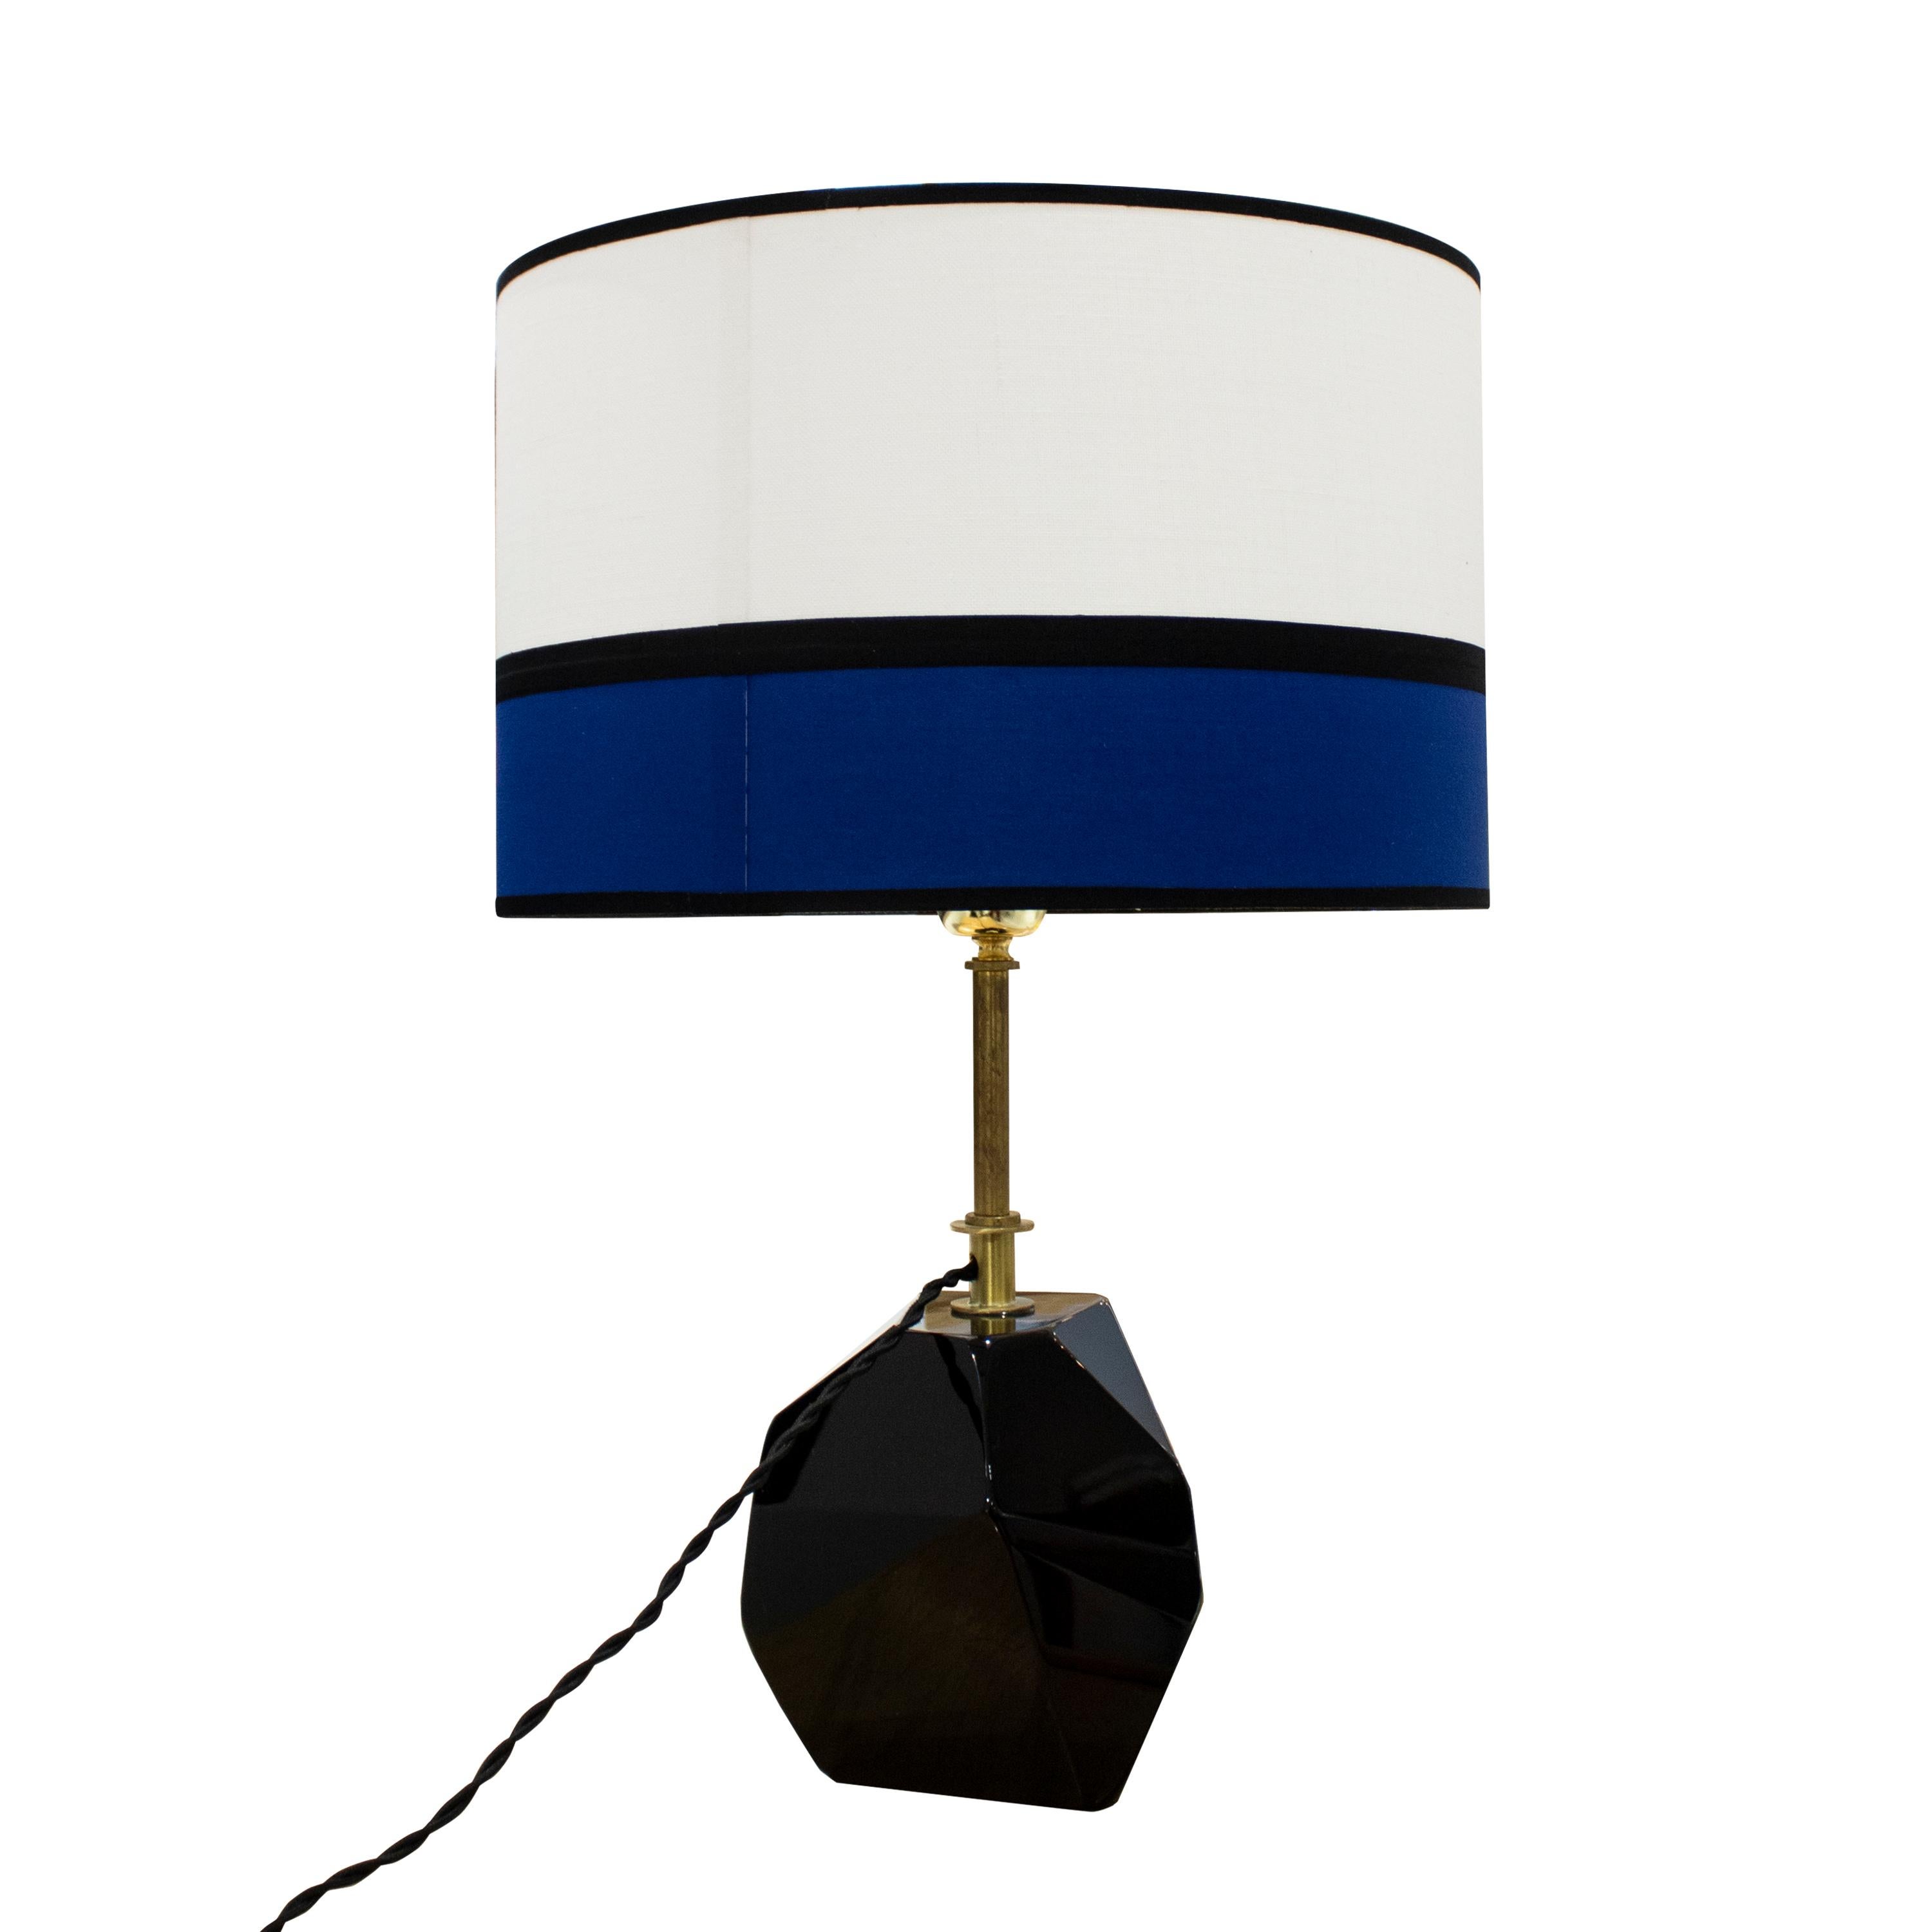 Mid-Century Modern dark purple Murano glass table lamp, Italy, 1950. 
Murano glass table lamp made by hand in translucent dark purple glass with a faceted design and solid brass stem. Accompanied by a fabric lampshade in blue, white, and black